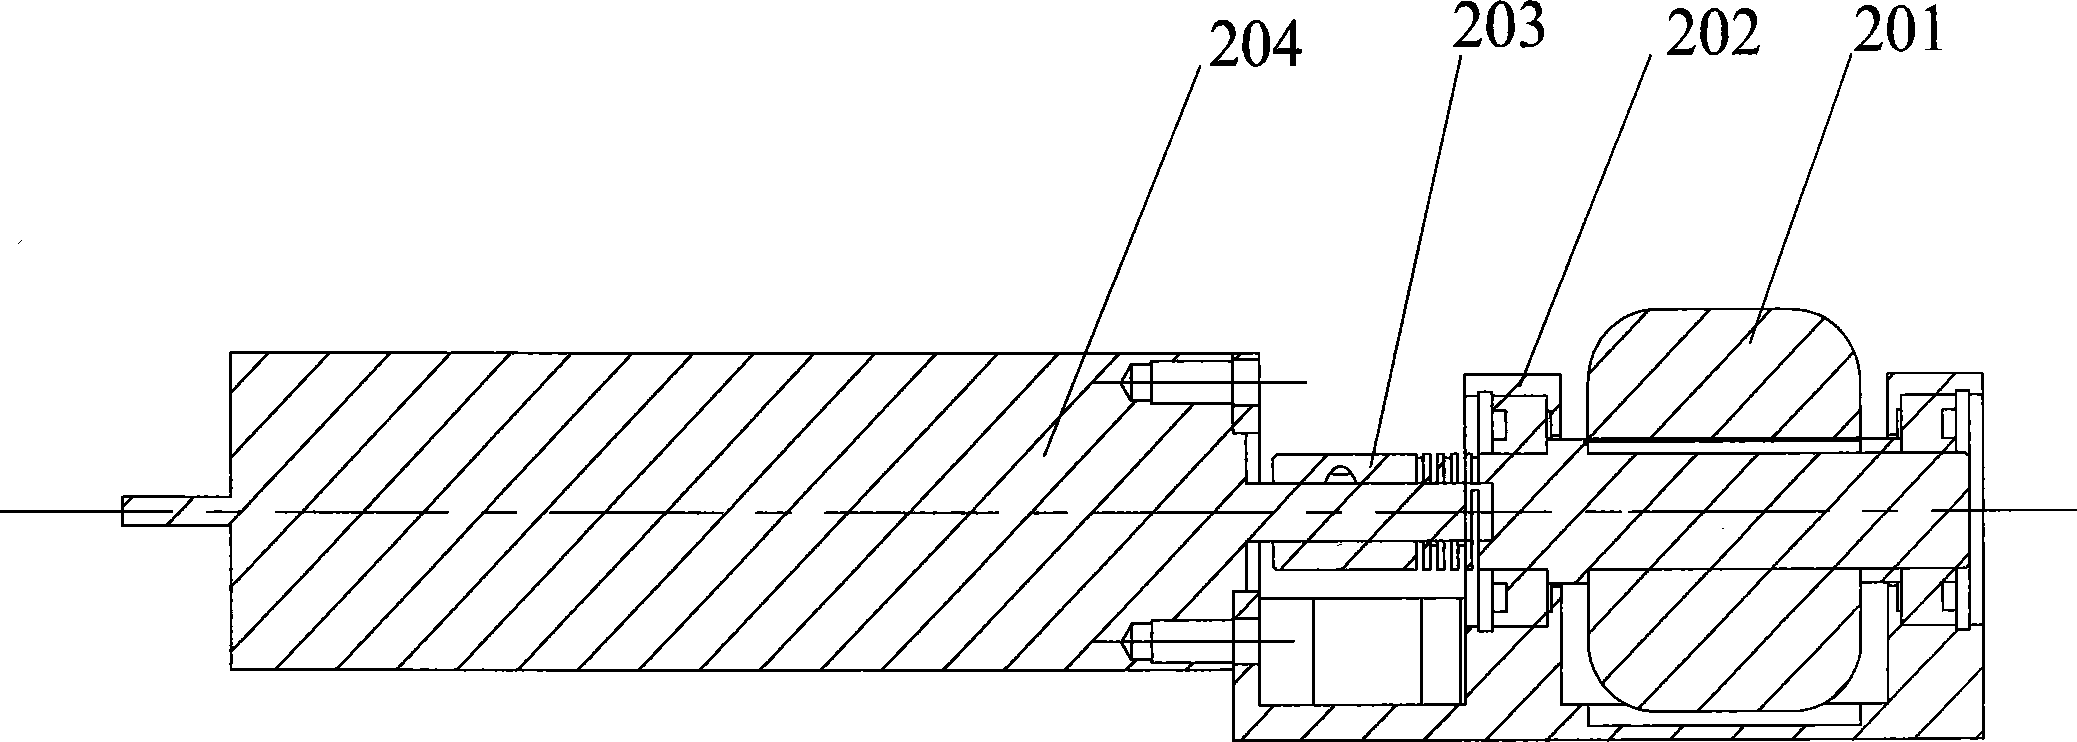 Computer moving support bracket